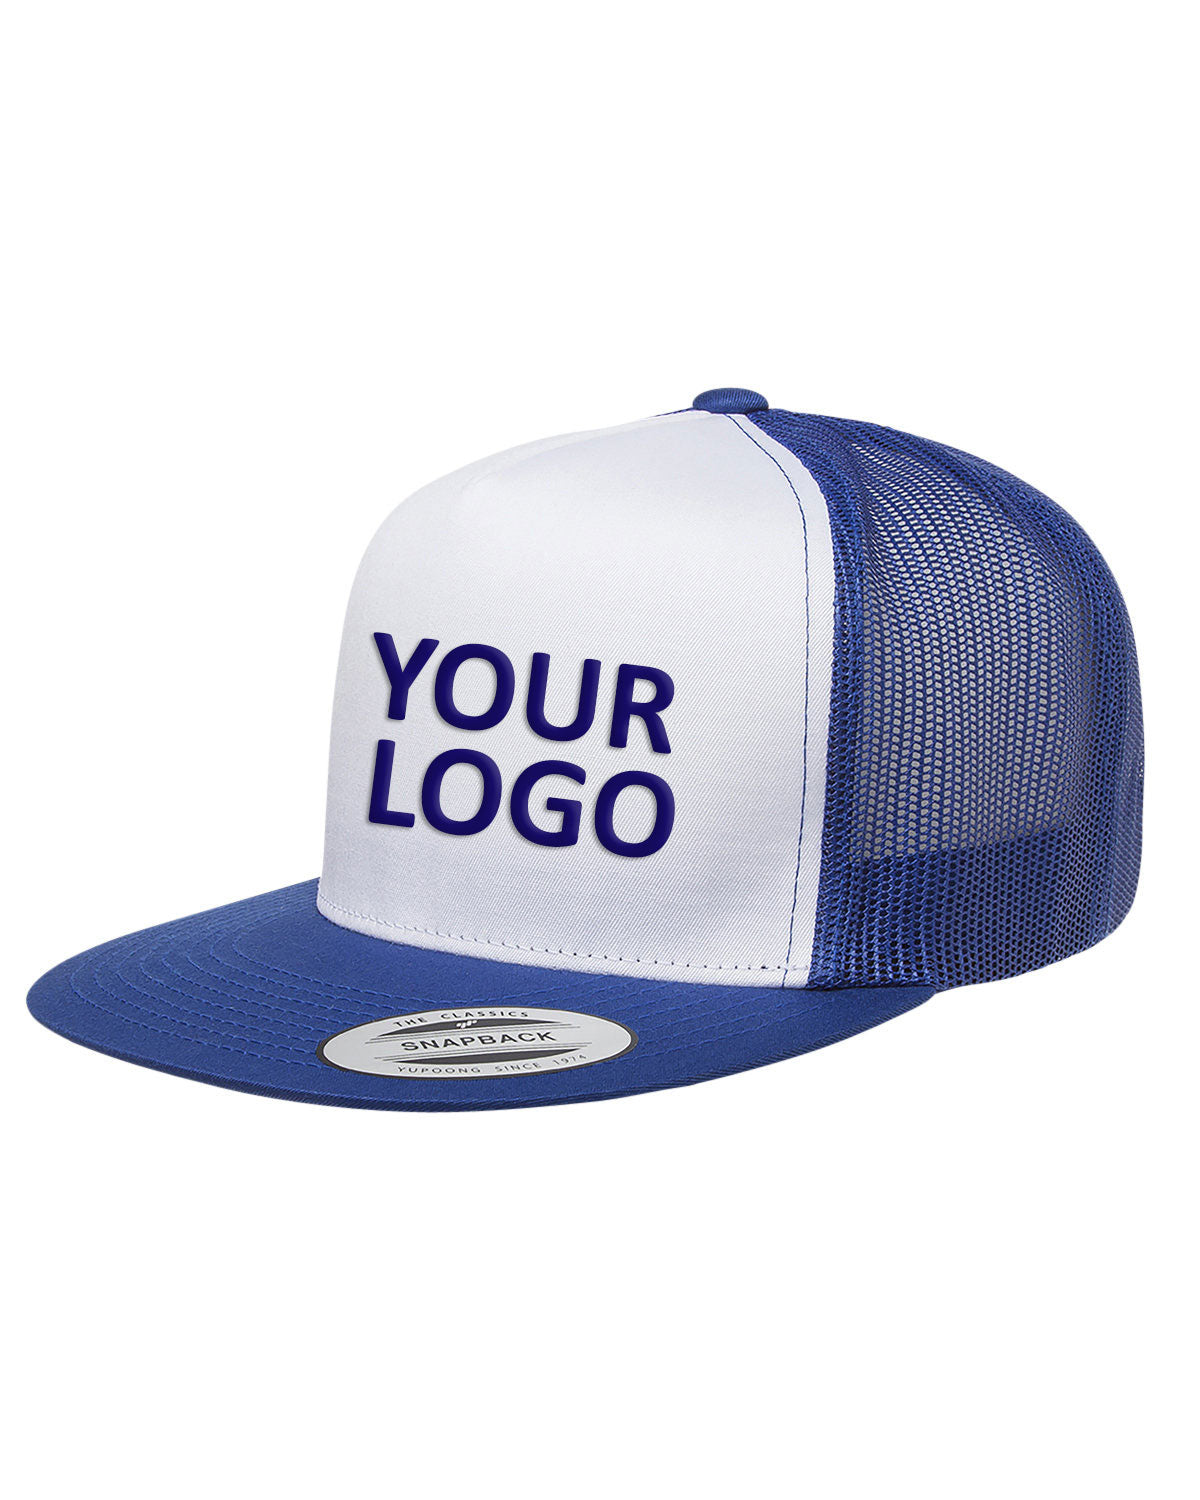 Yupoong Adult Classic Trucker with White Front Panel Cap 6006W ROYAL/ WHT/ ROYL